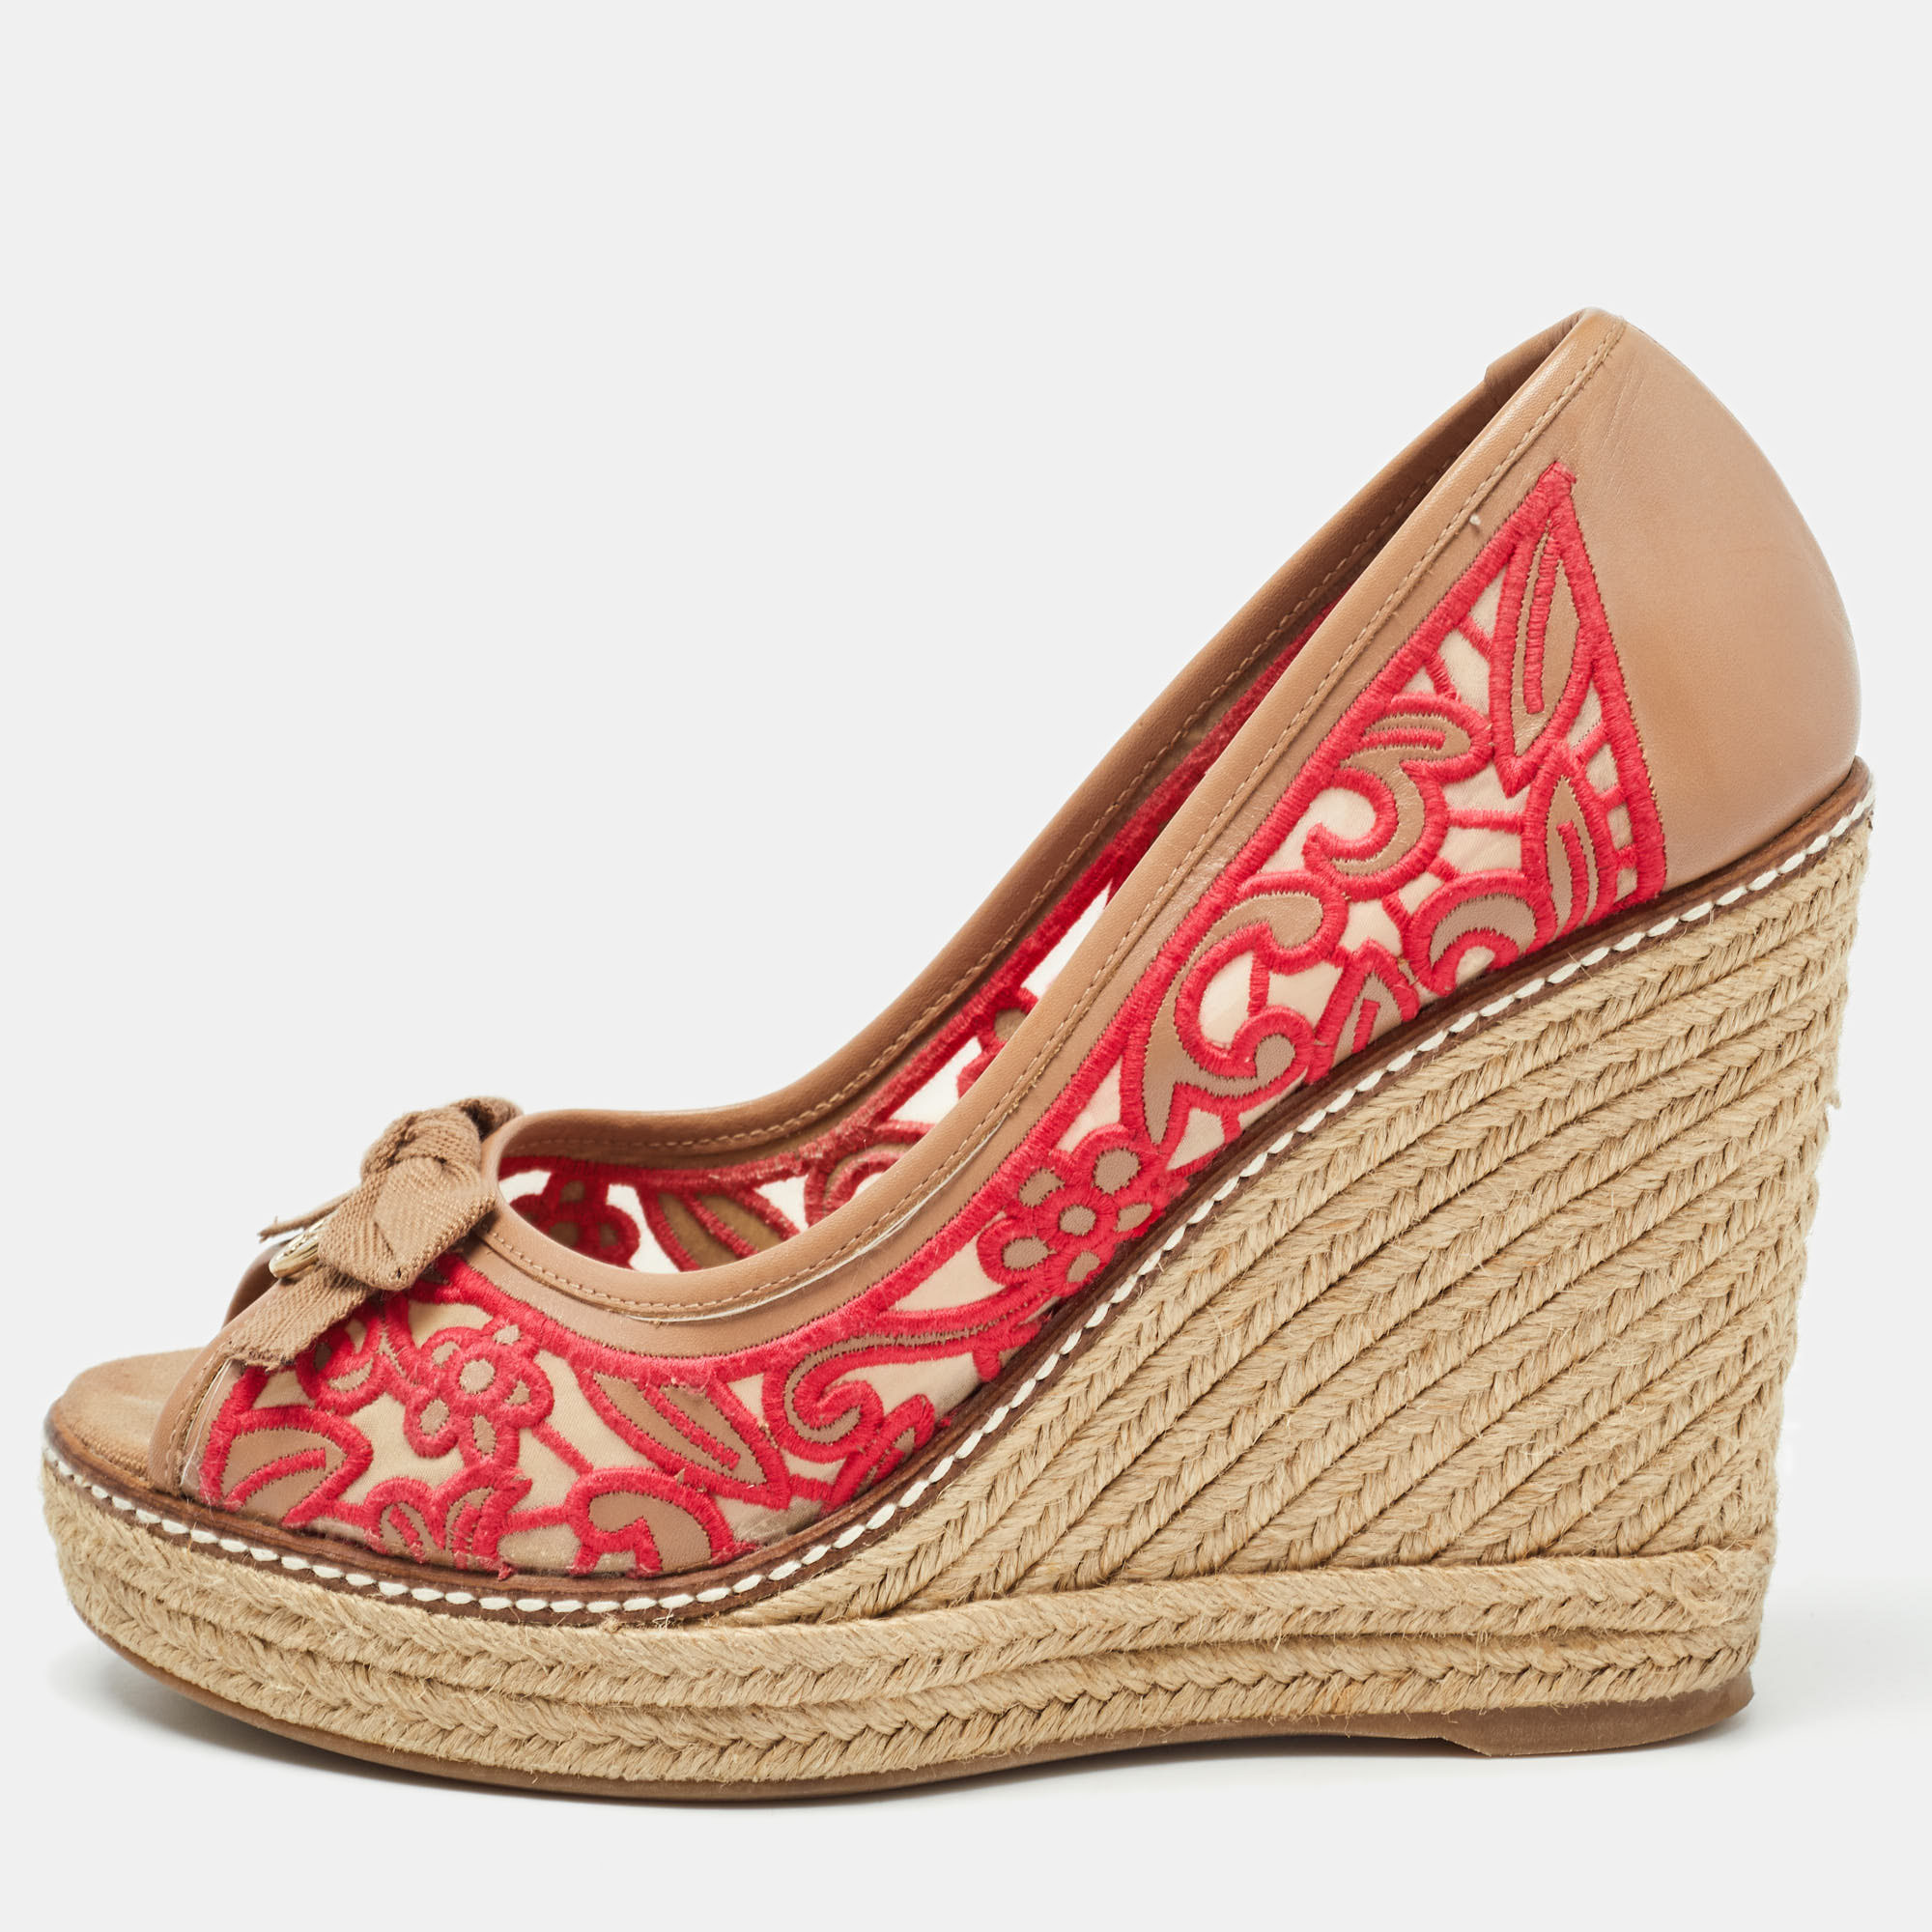 Tory burch brown/pink leather and embroidered fabric jackie espadrille wedge pumps size 37.5